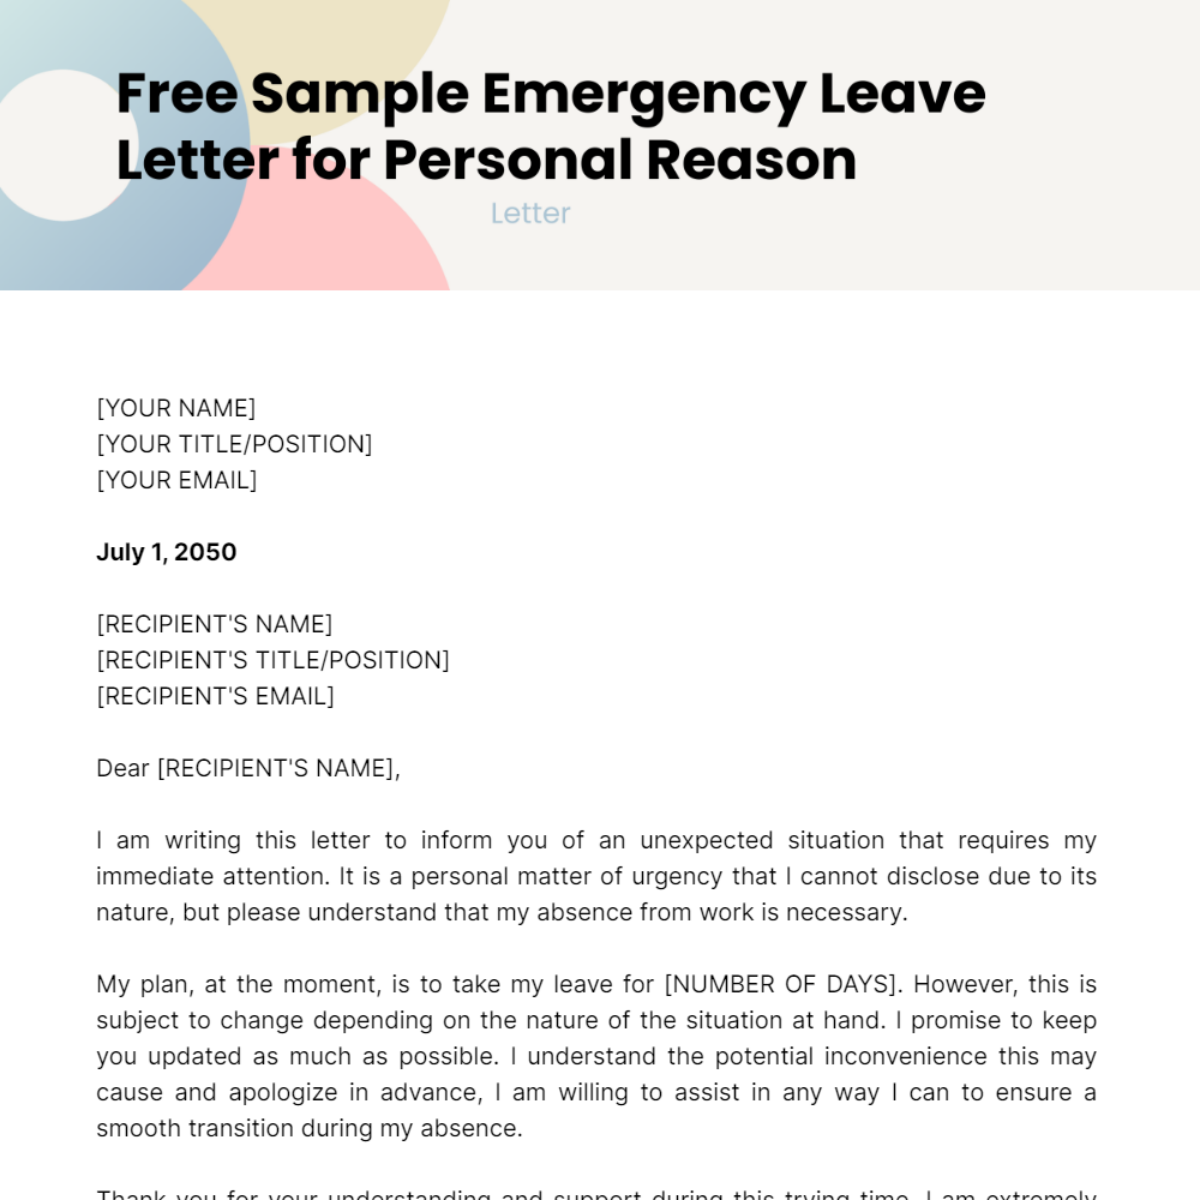 Sample Emergency Leave Letter for Personal Reason Template